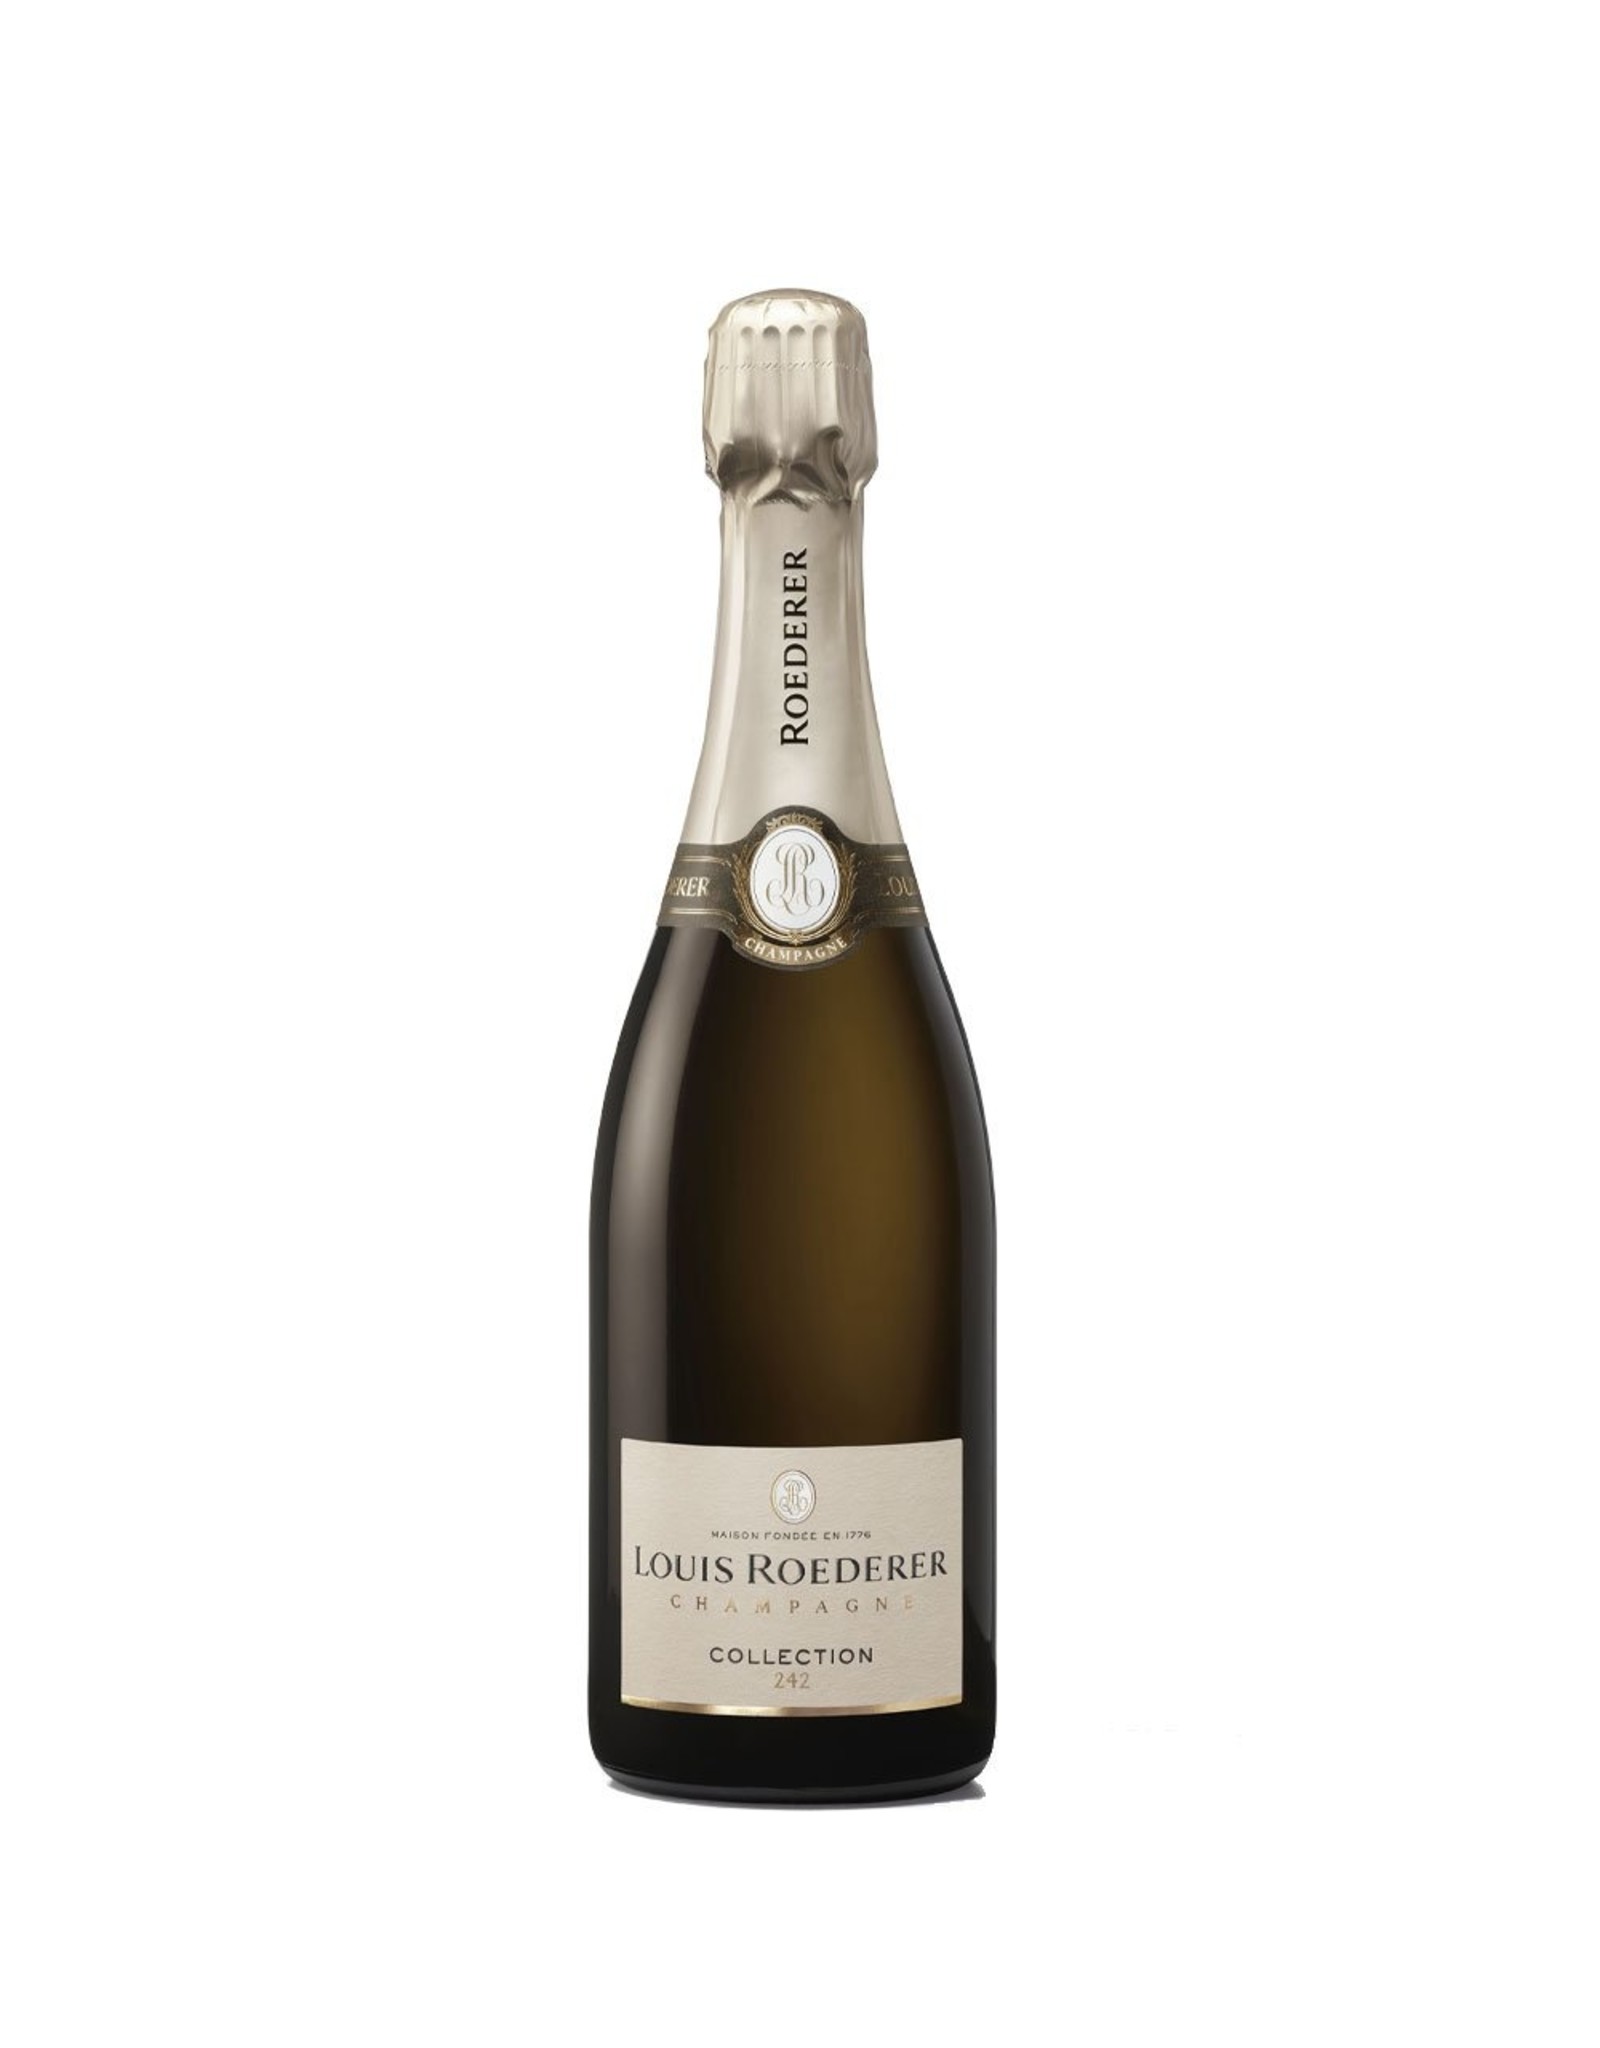 Roederer Collection 242 Brut Champagne 375ml